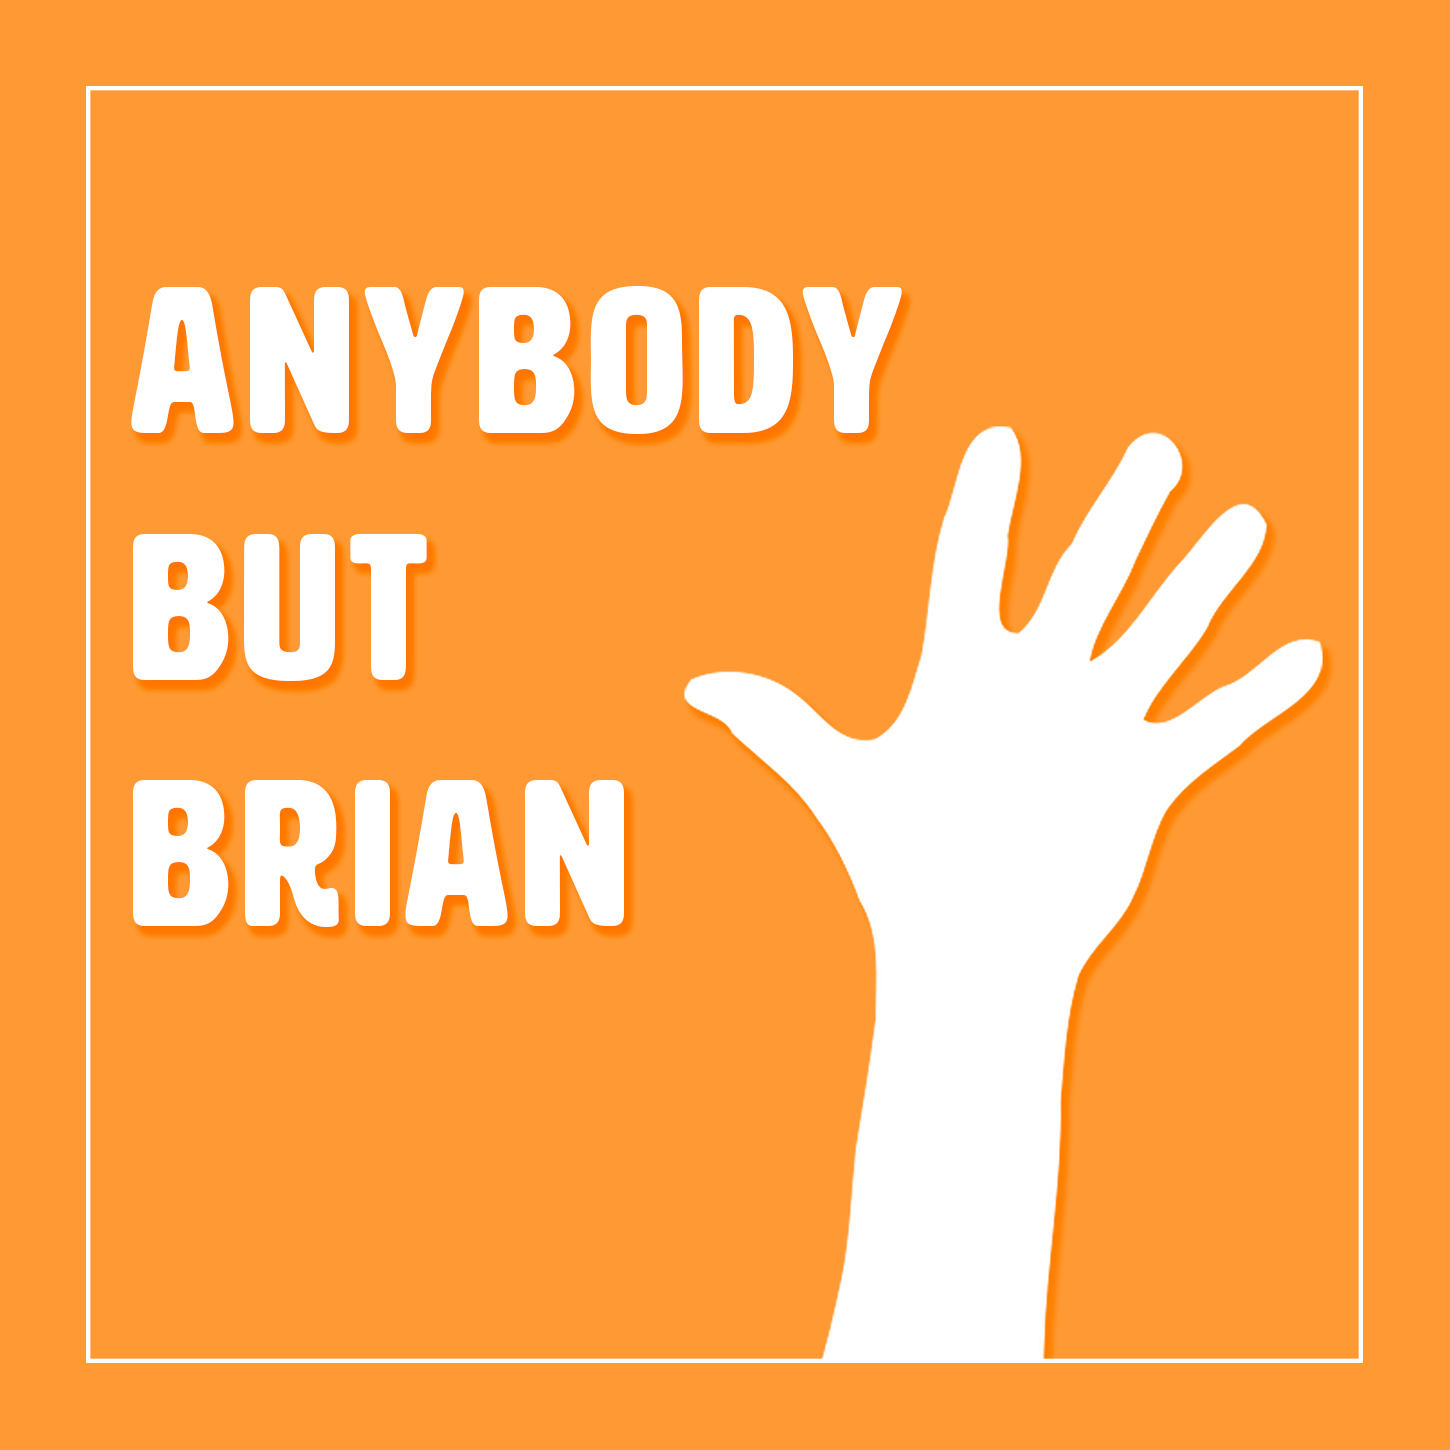 Anybody but Brian | Episode 1: Growth for Growth's Sake